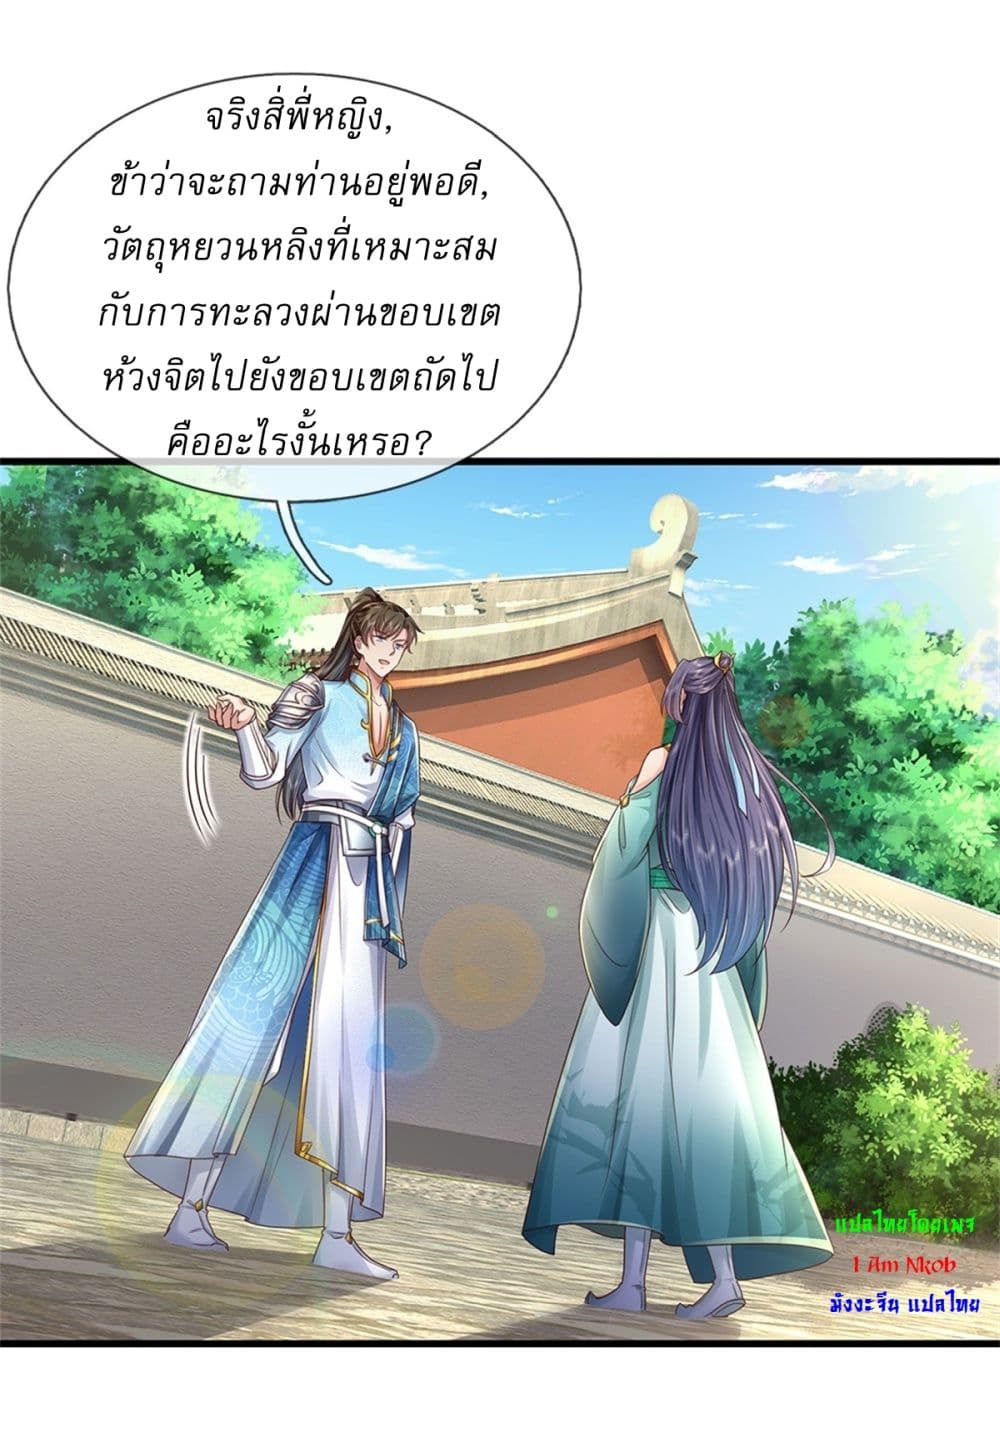 I Can Change The Timeline of Everything ตอนที่ 43 (16)